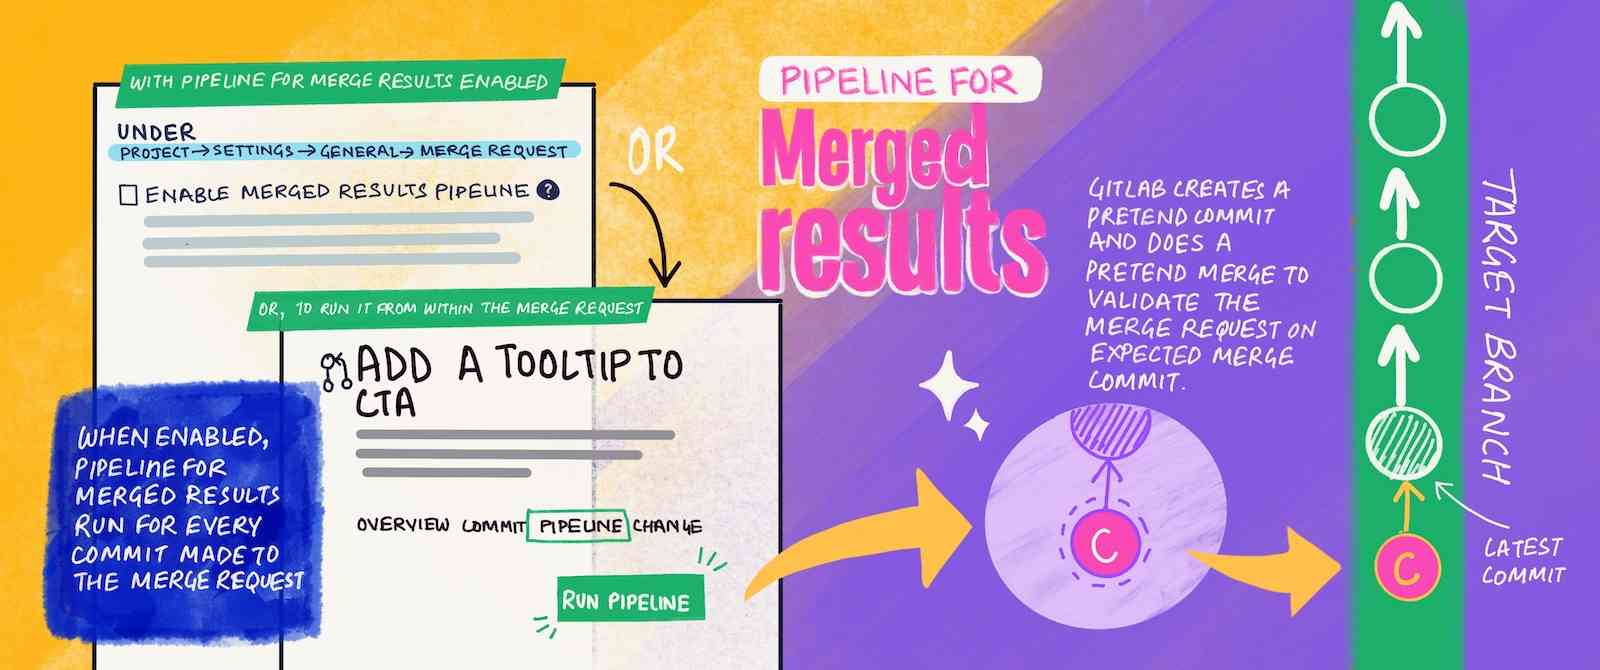 Pipeline for merge results